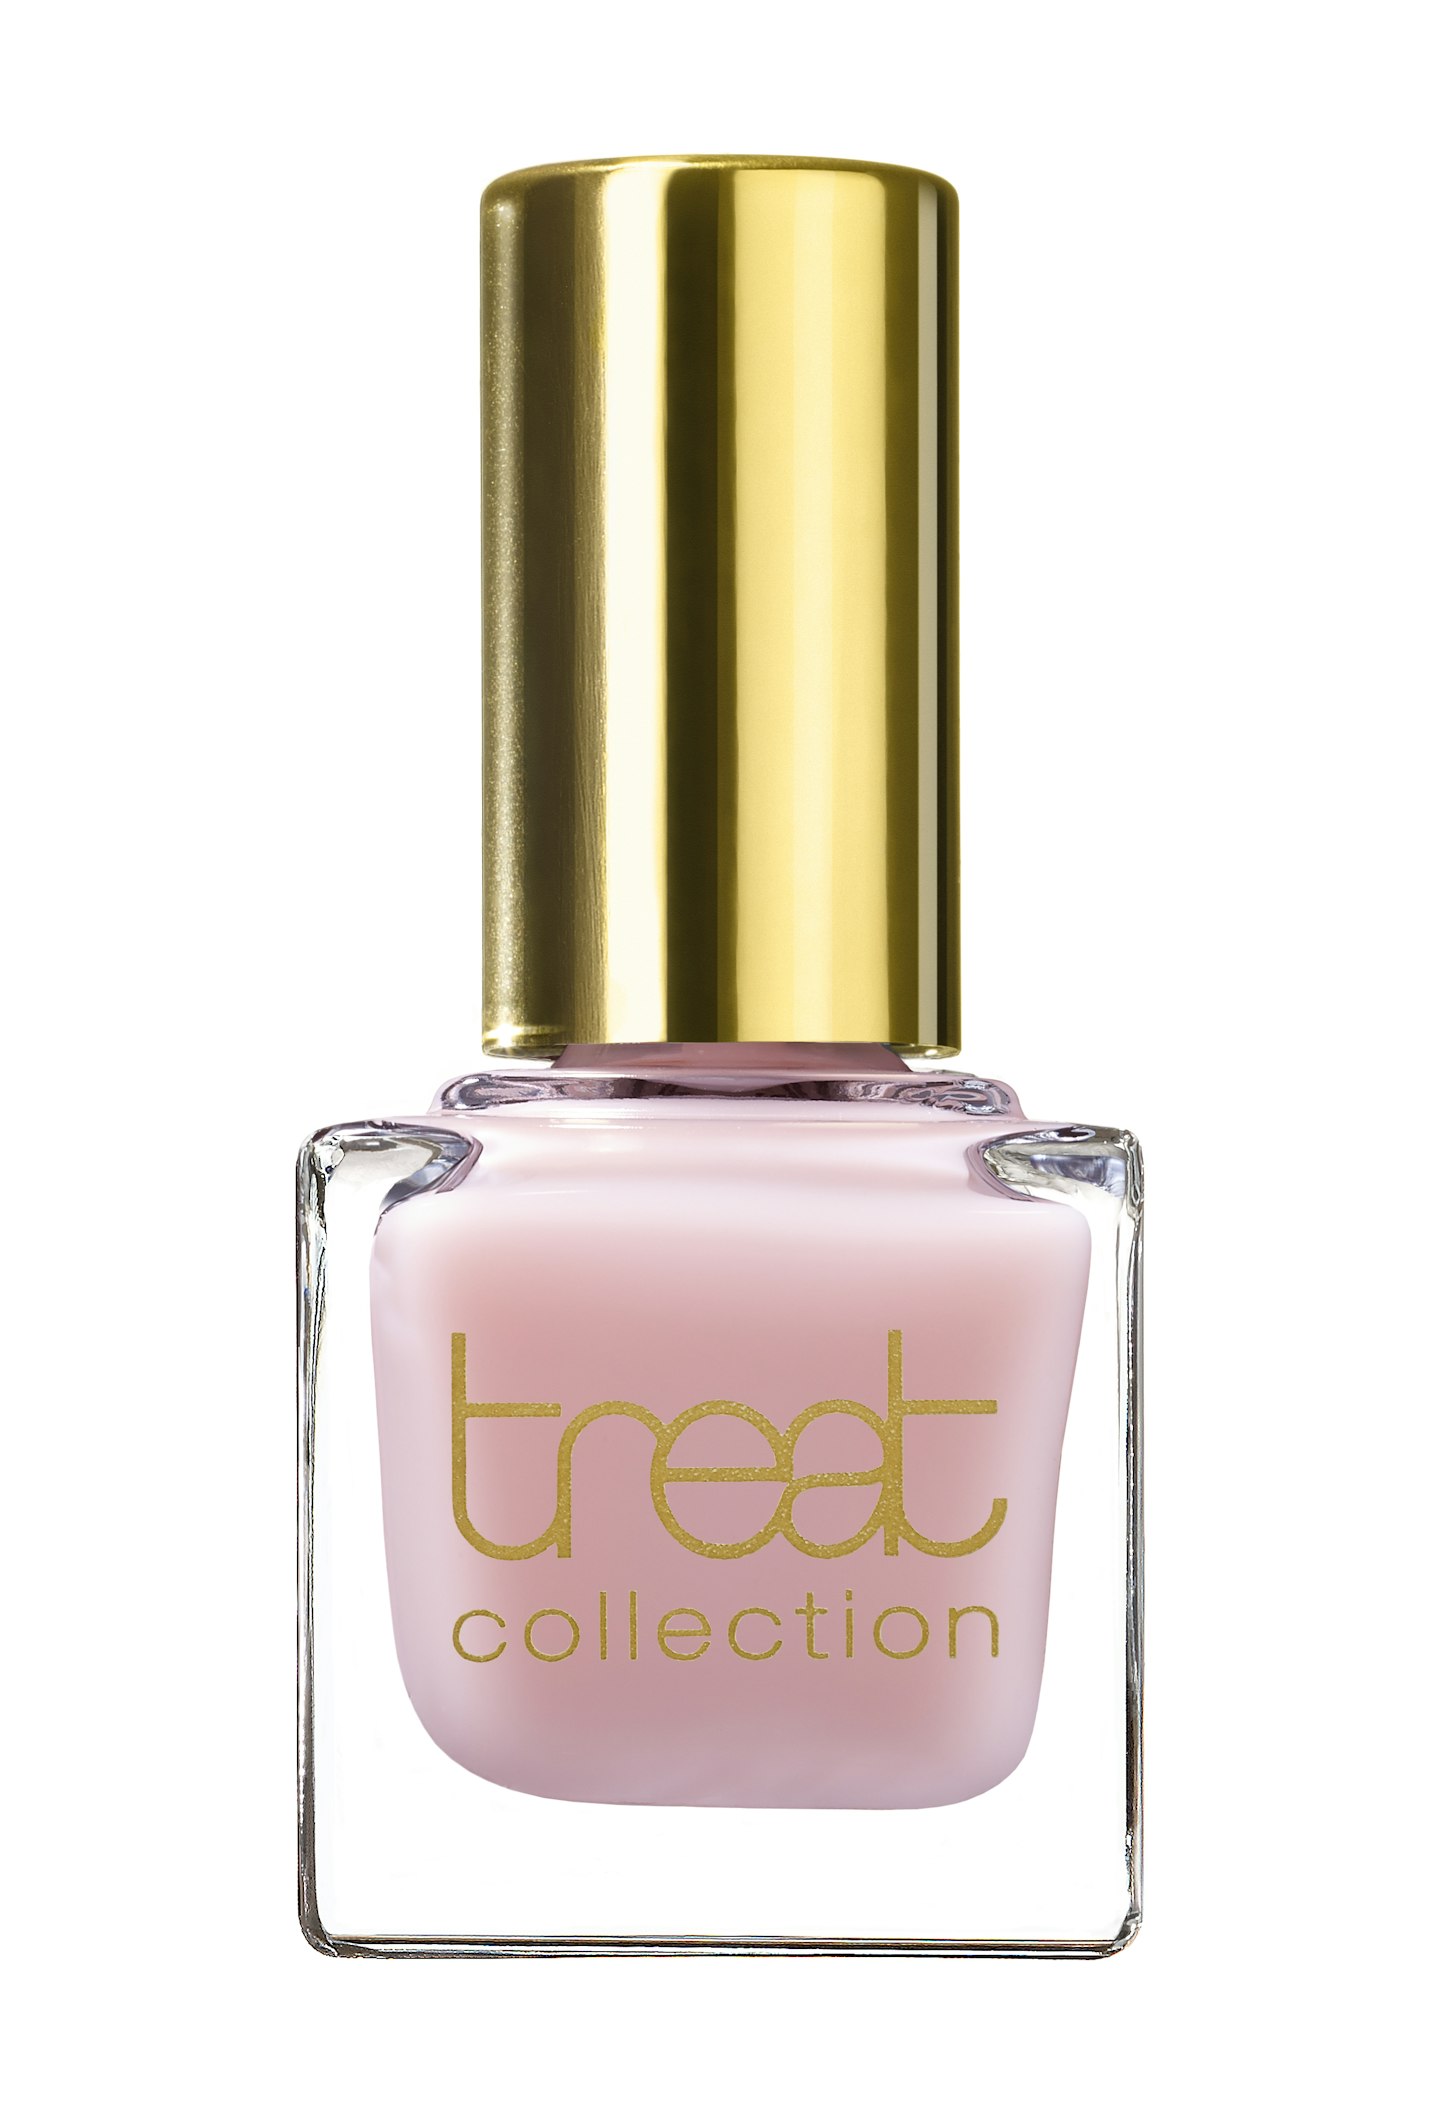 Treat Collection Nail Polish in Cherry Blossom